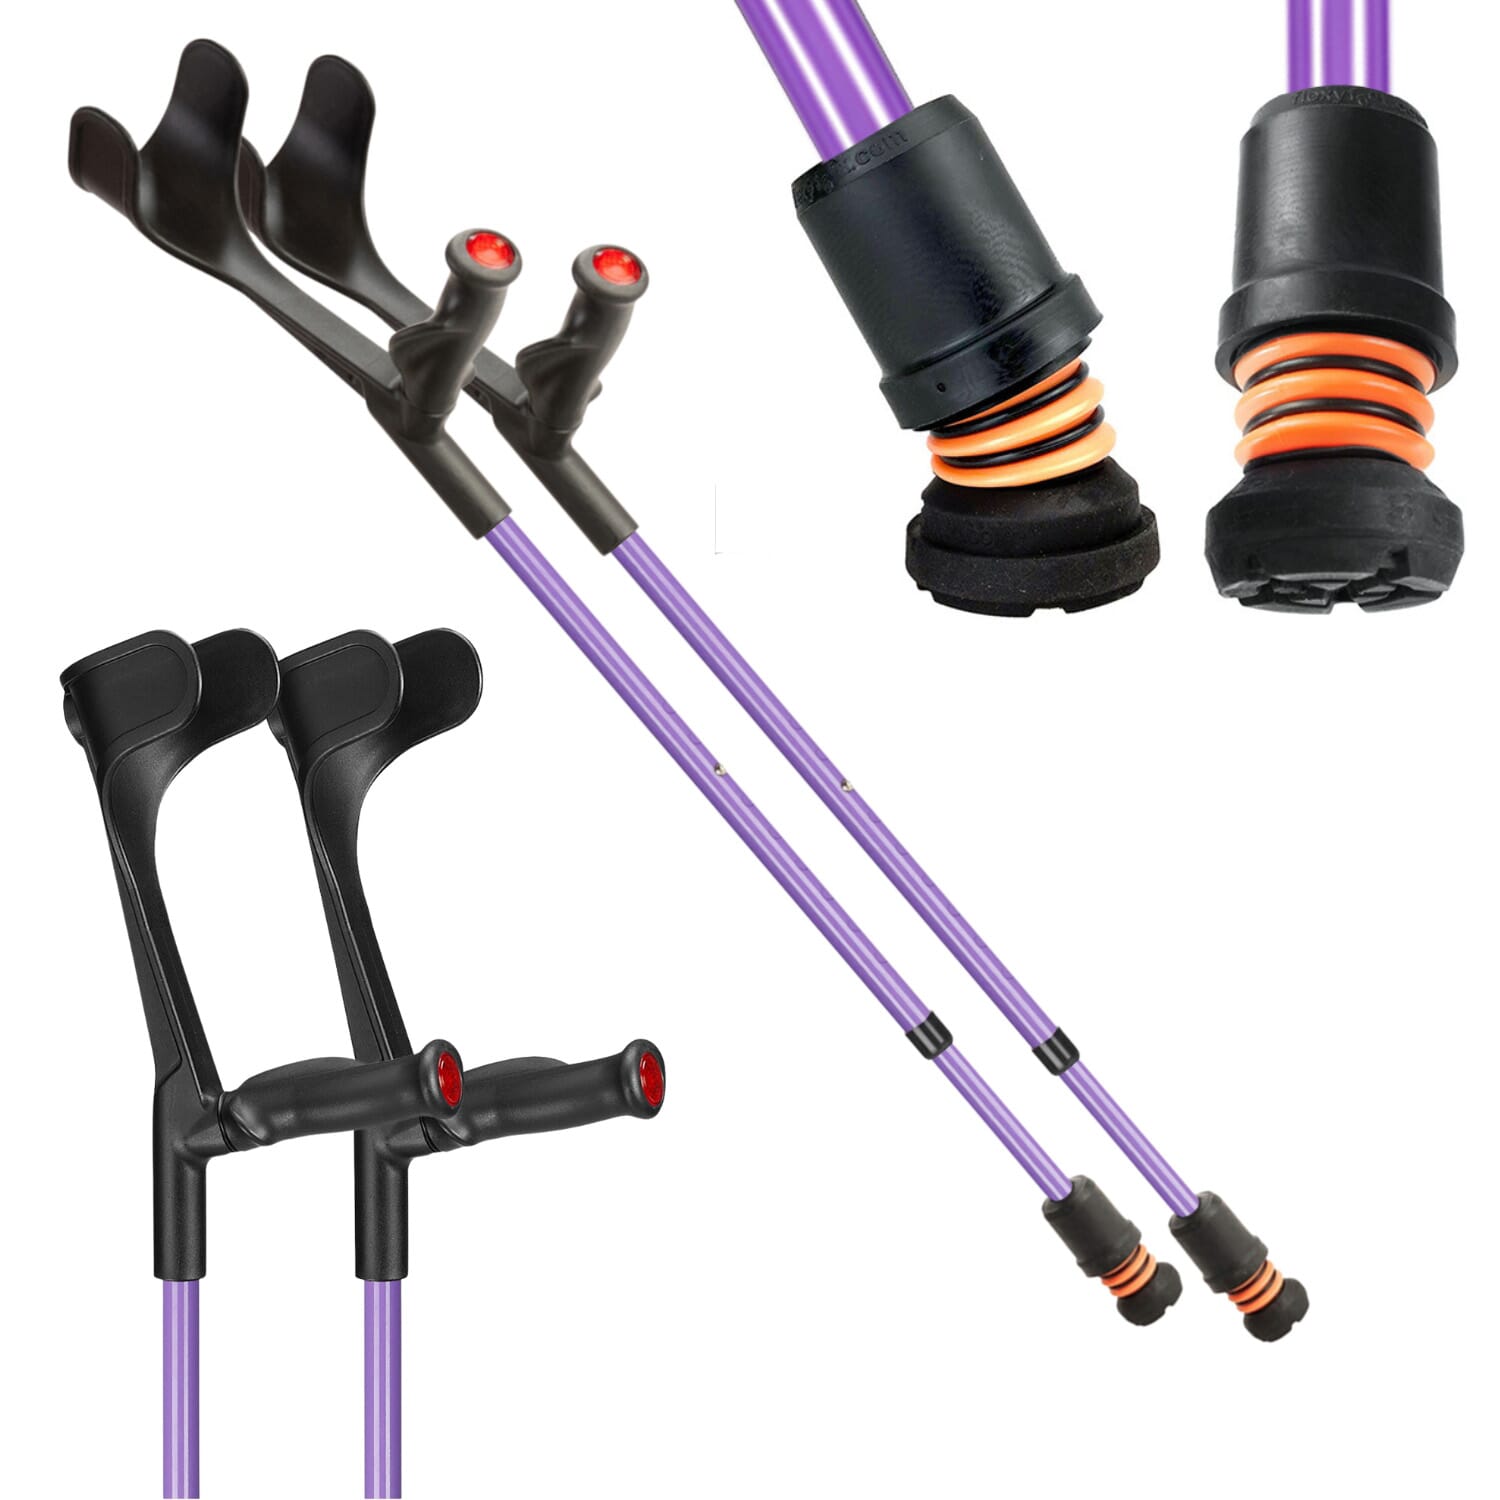 View Flexyfoot Open Cuff Comfort Grip Crutches Lilac Pair information